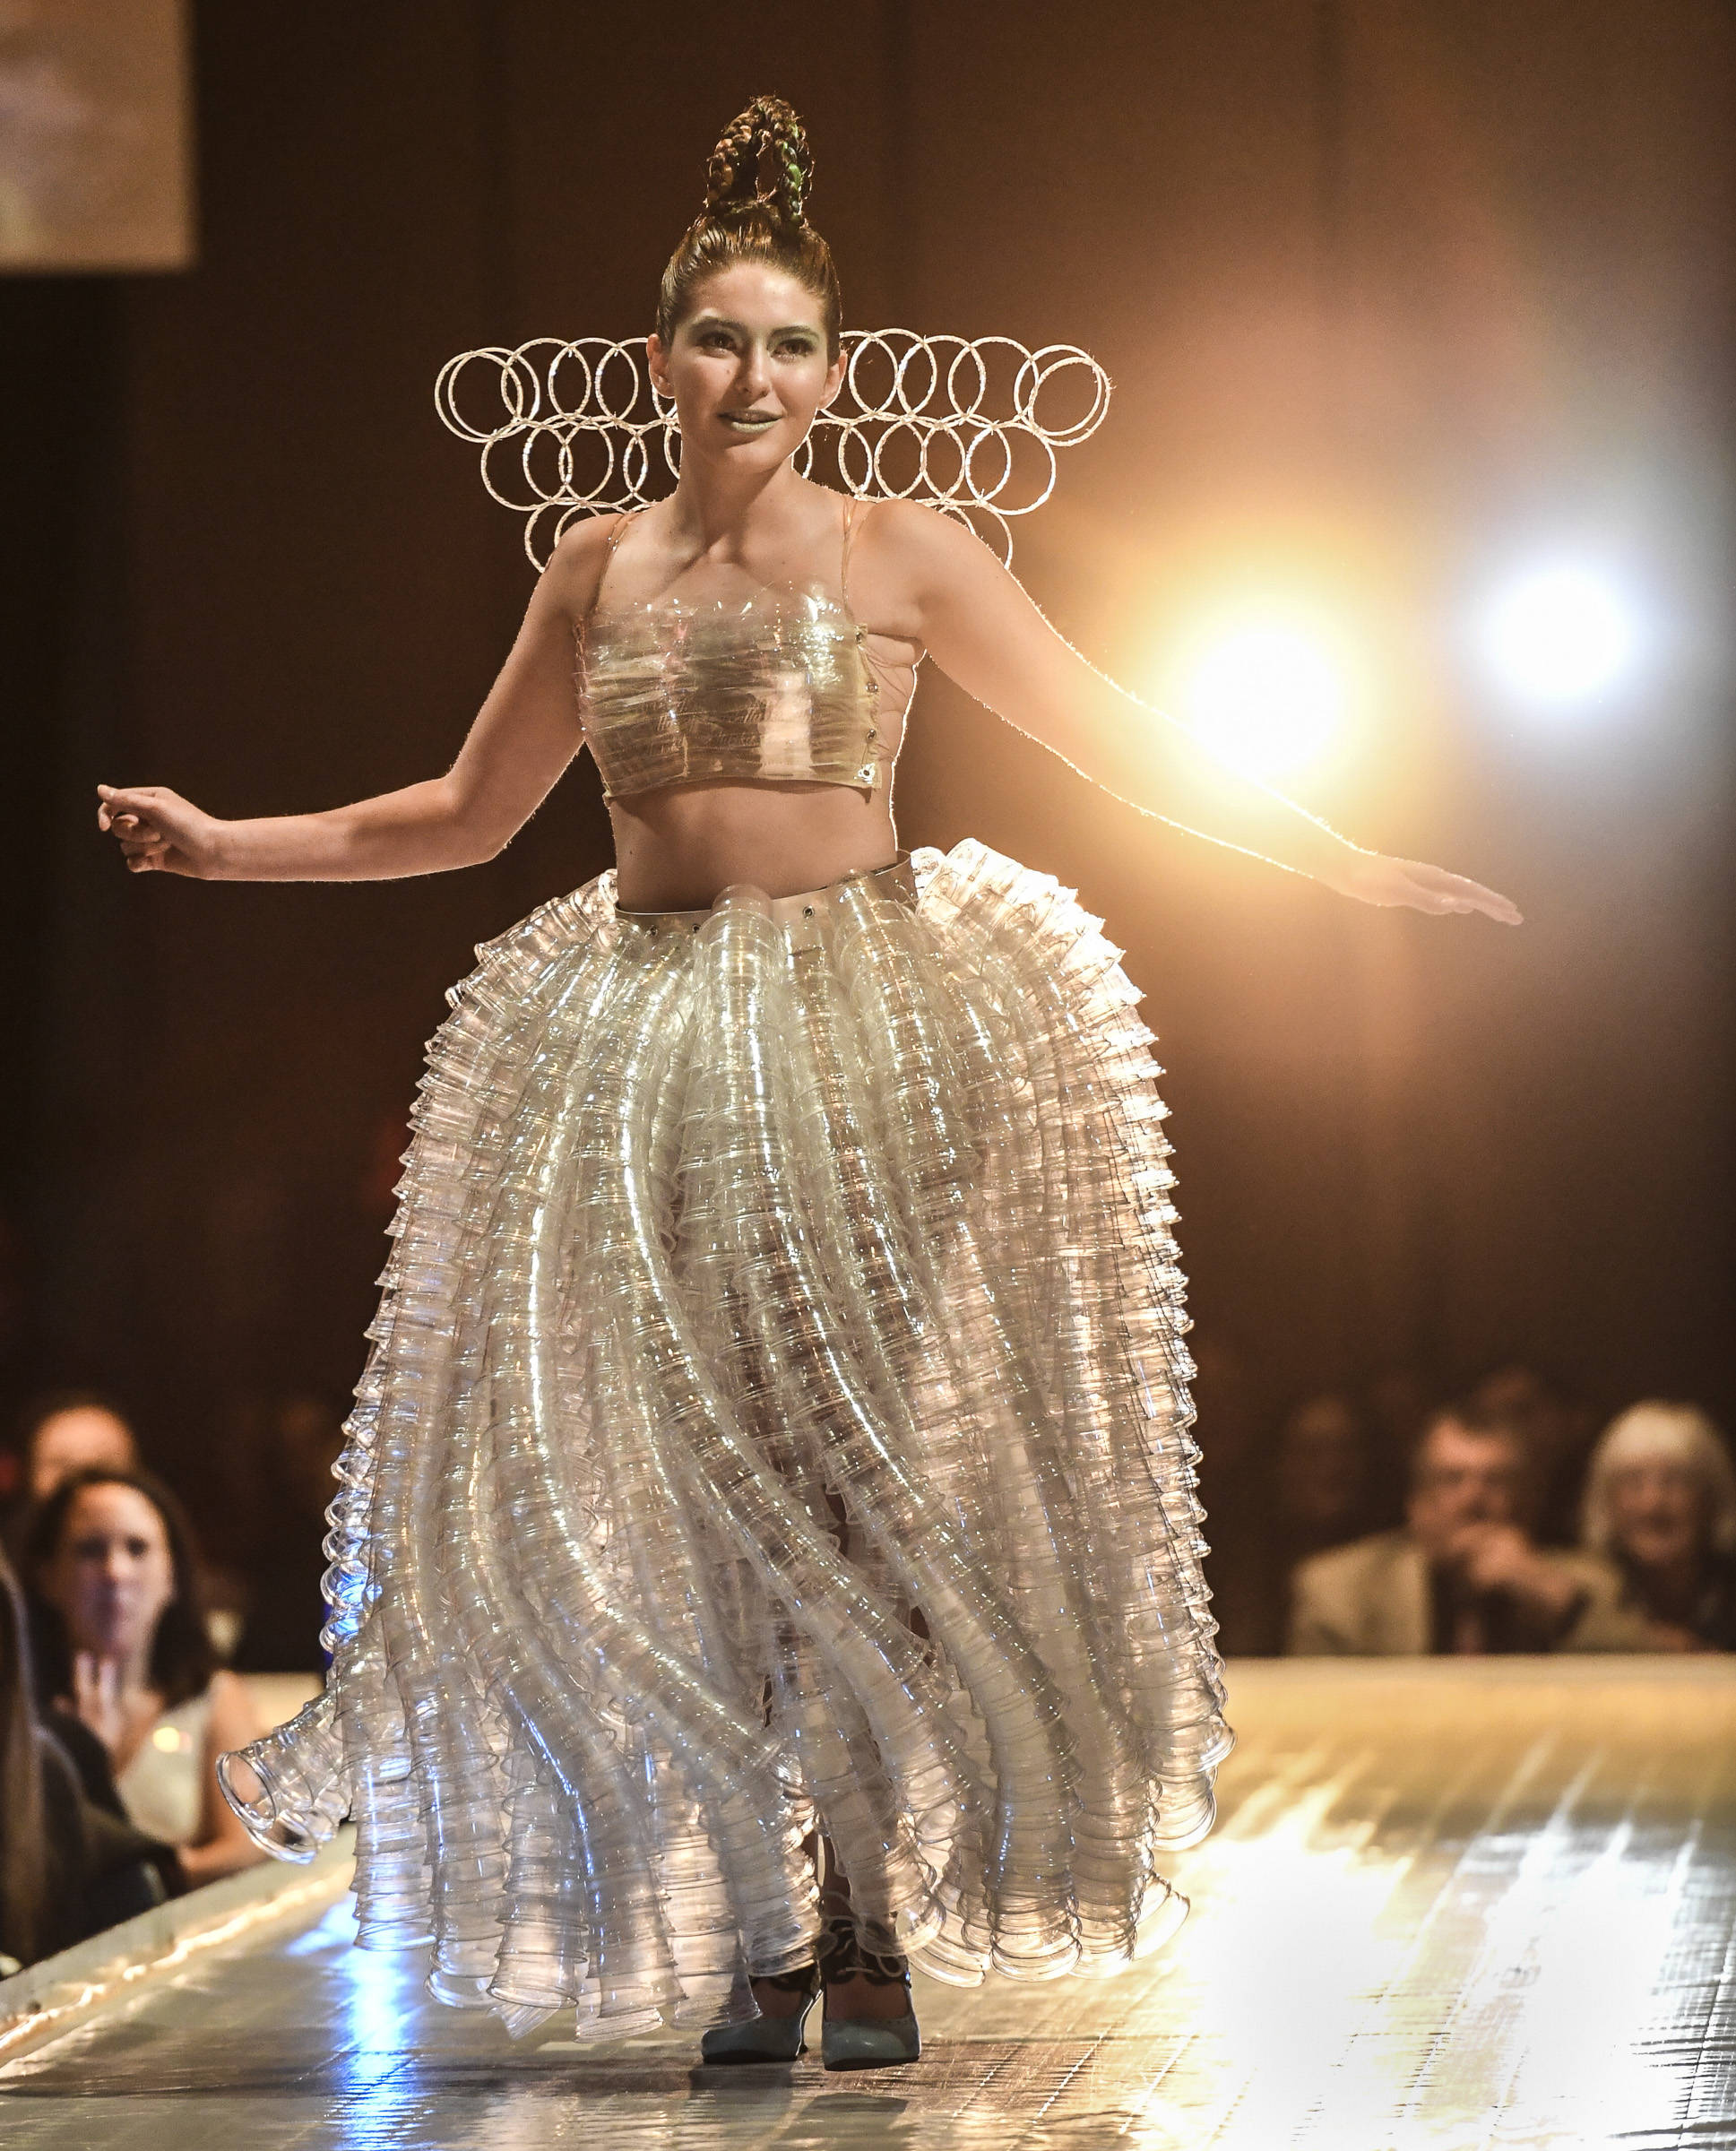 London's Science Museum hosts space-inspired fashion show  #WearableWednesday « Adafruit Industries – Makers, hackers, artists,  designers and engineers!